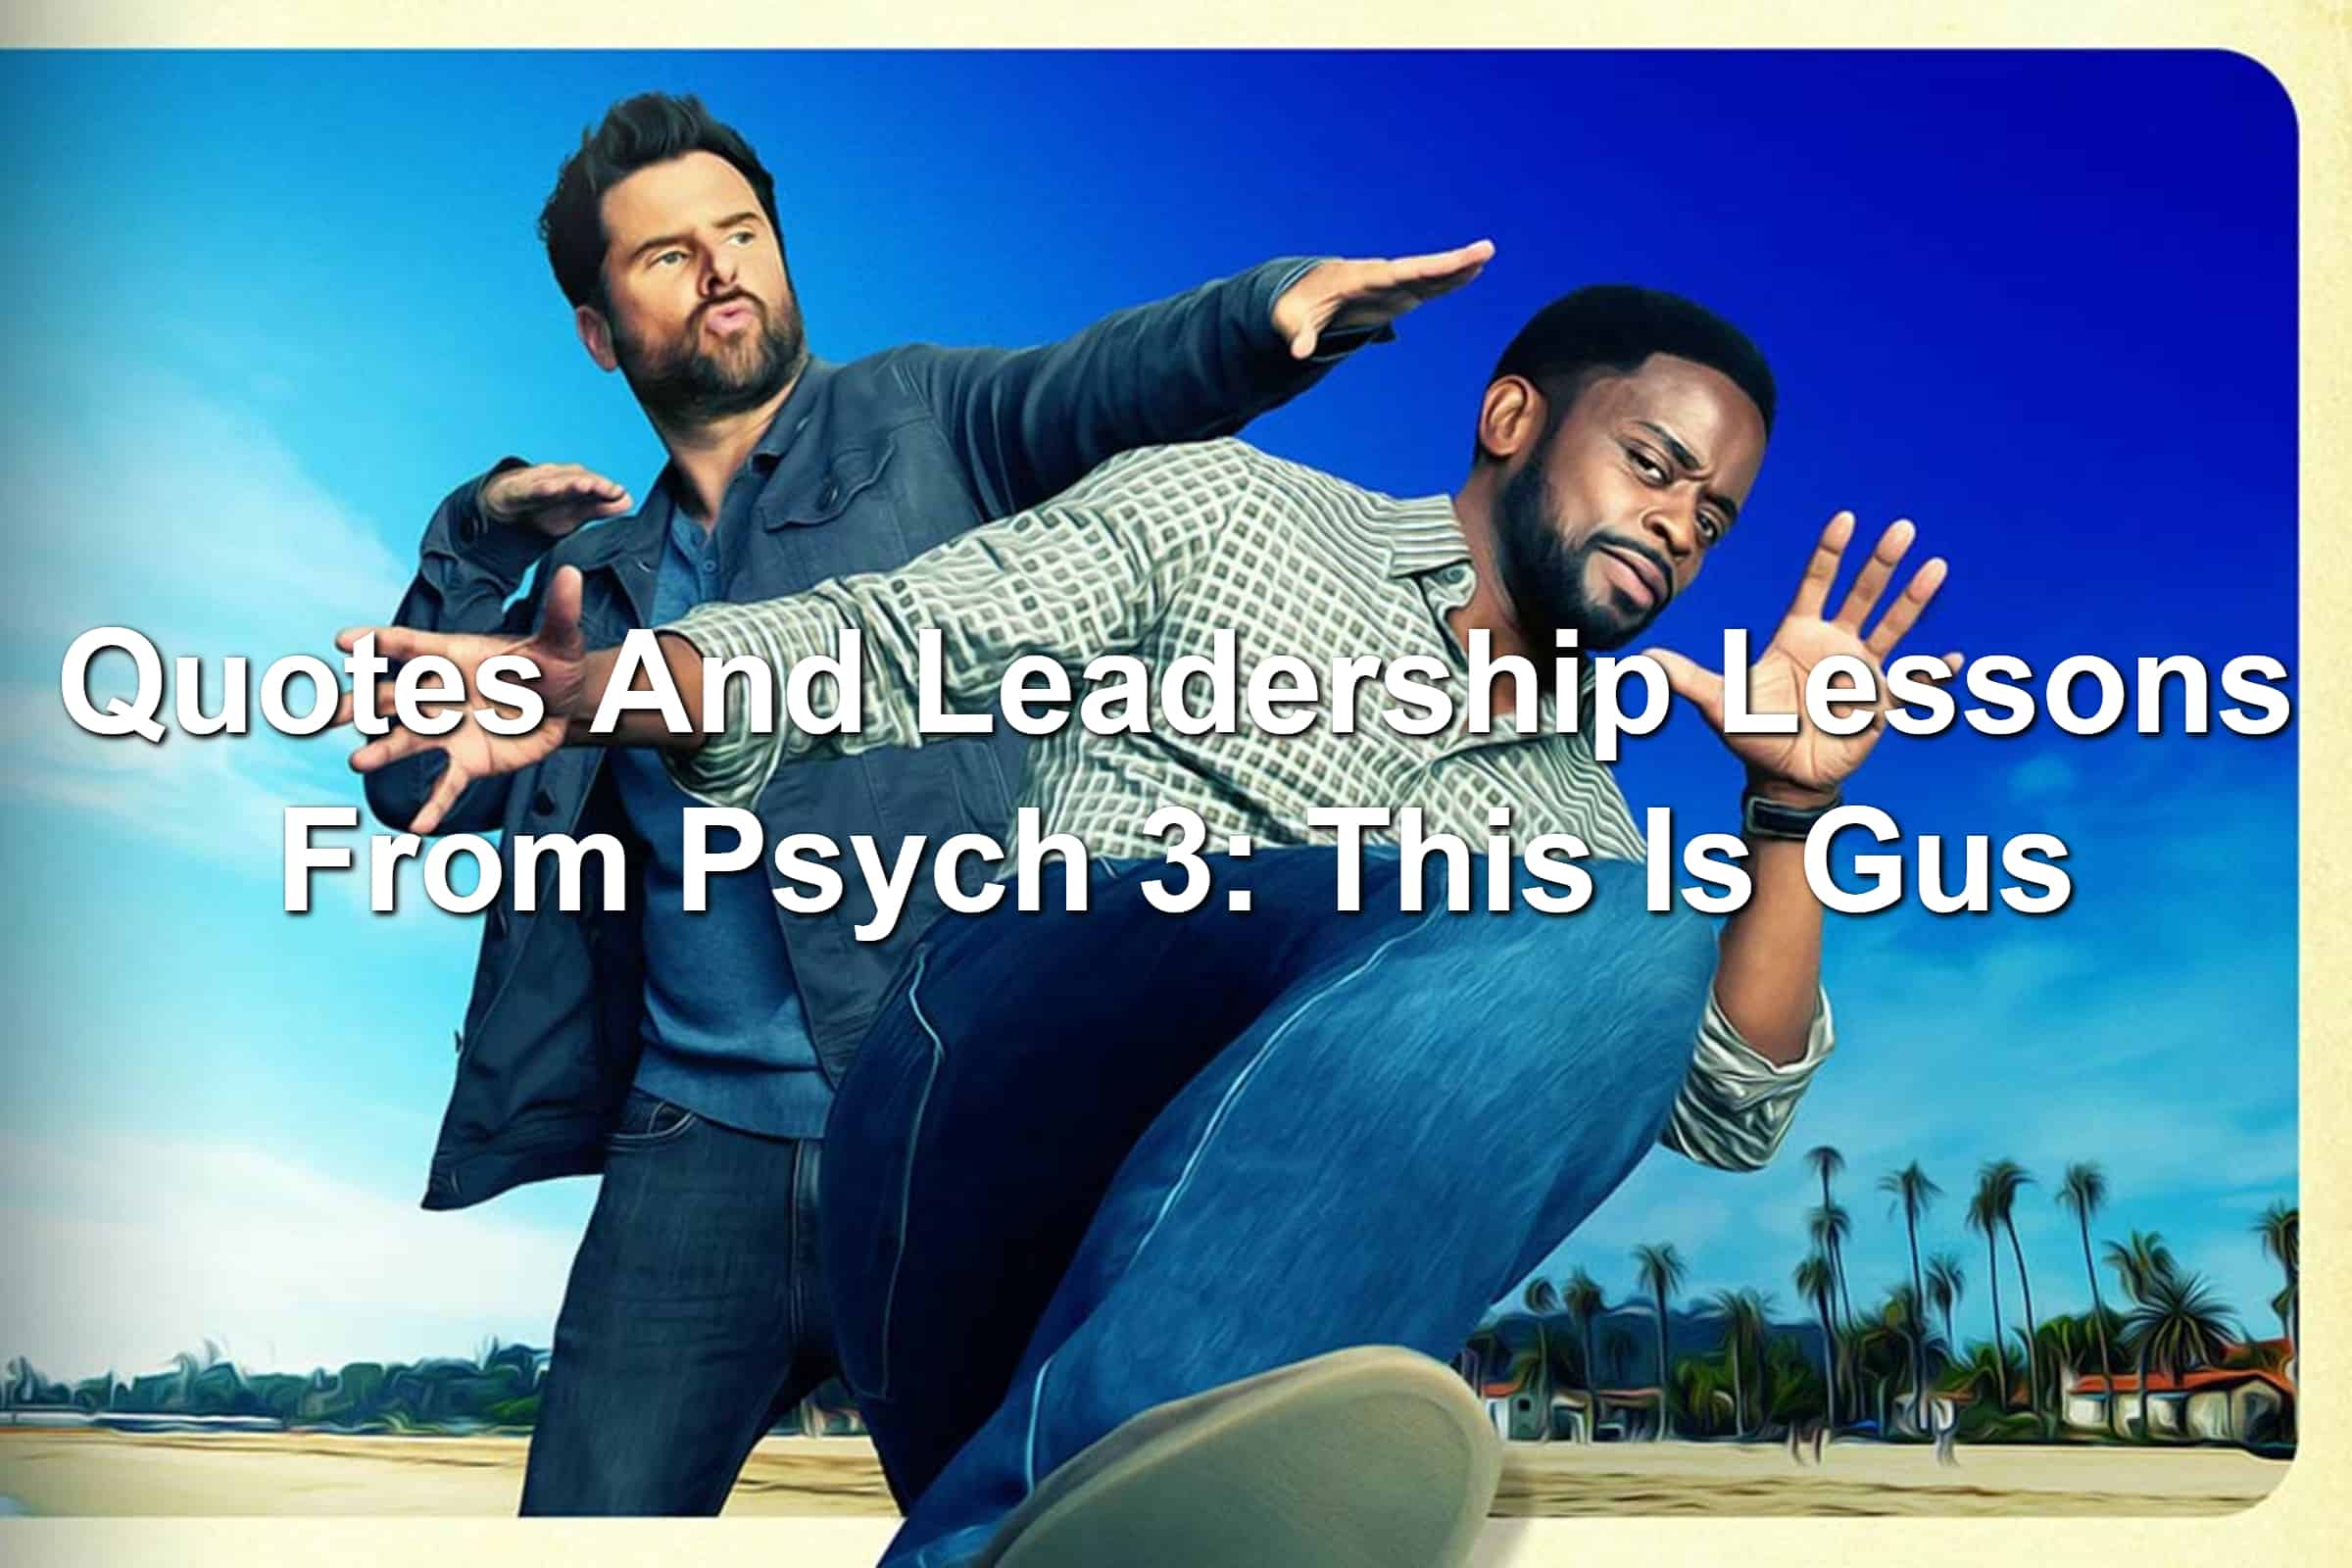 Shawn and Gus in a funny pose from Psych 3: This Is Gus